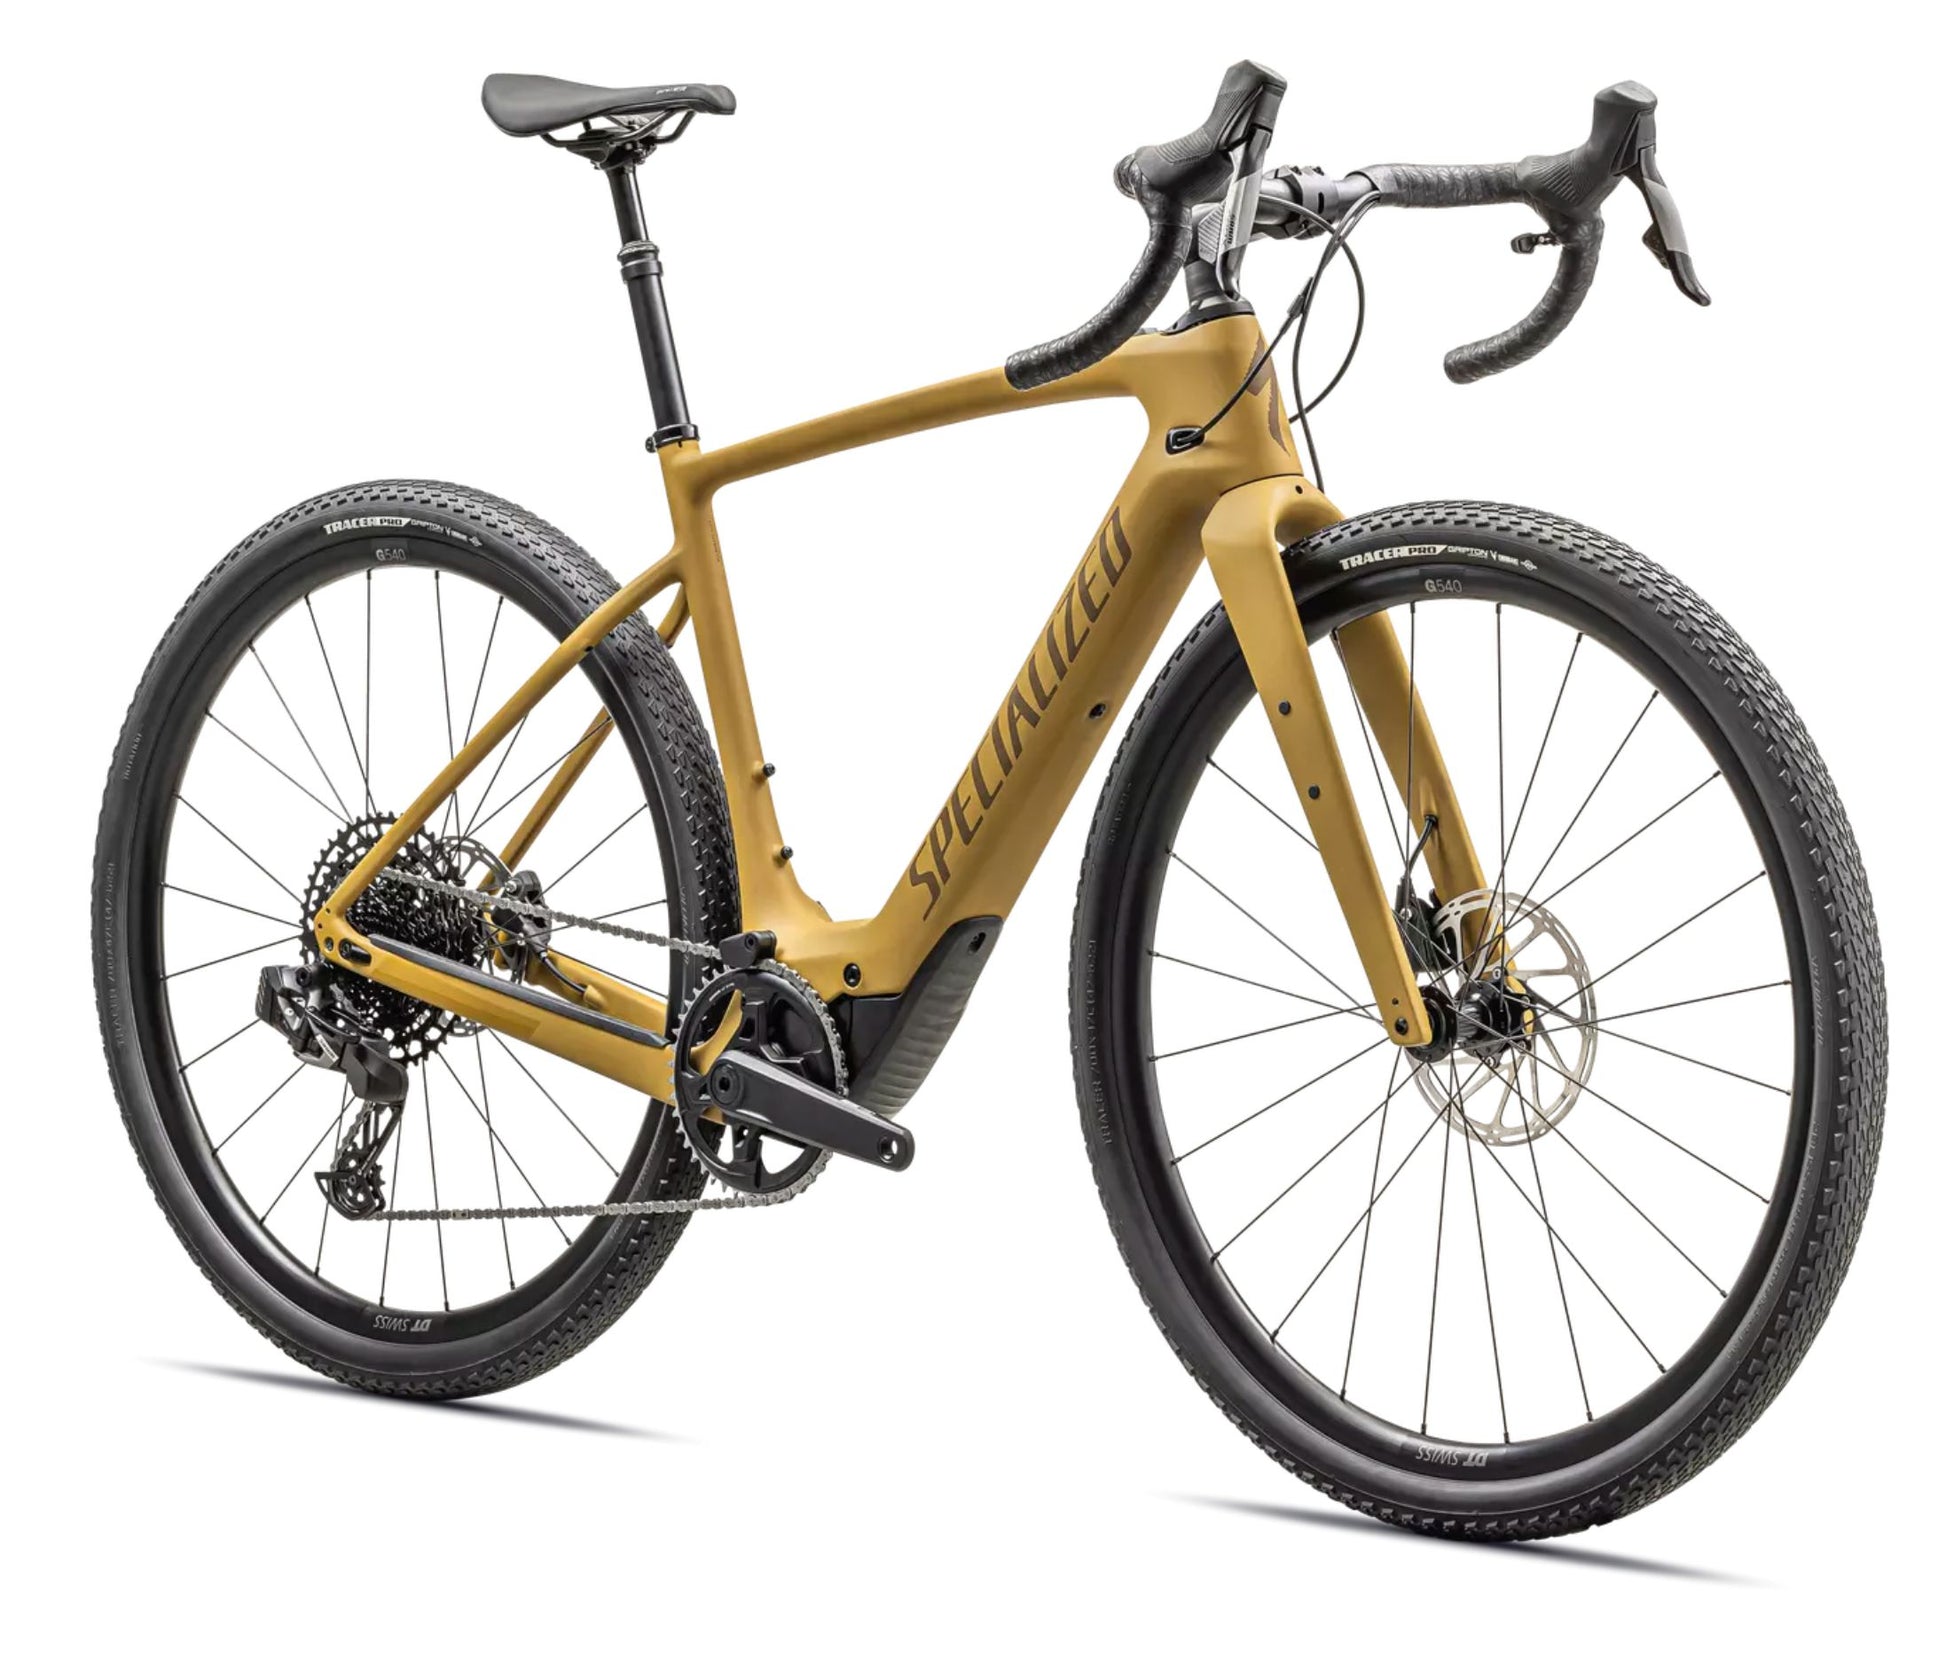 Specialized Turbo Creo 2 Comp Harvest gold angled view